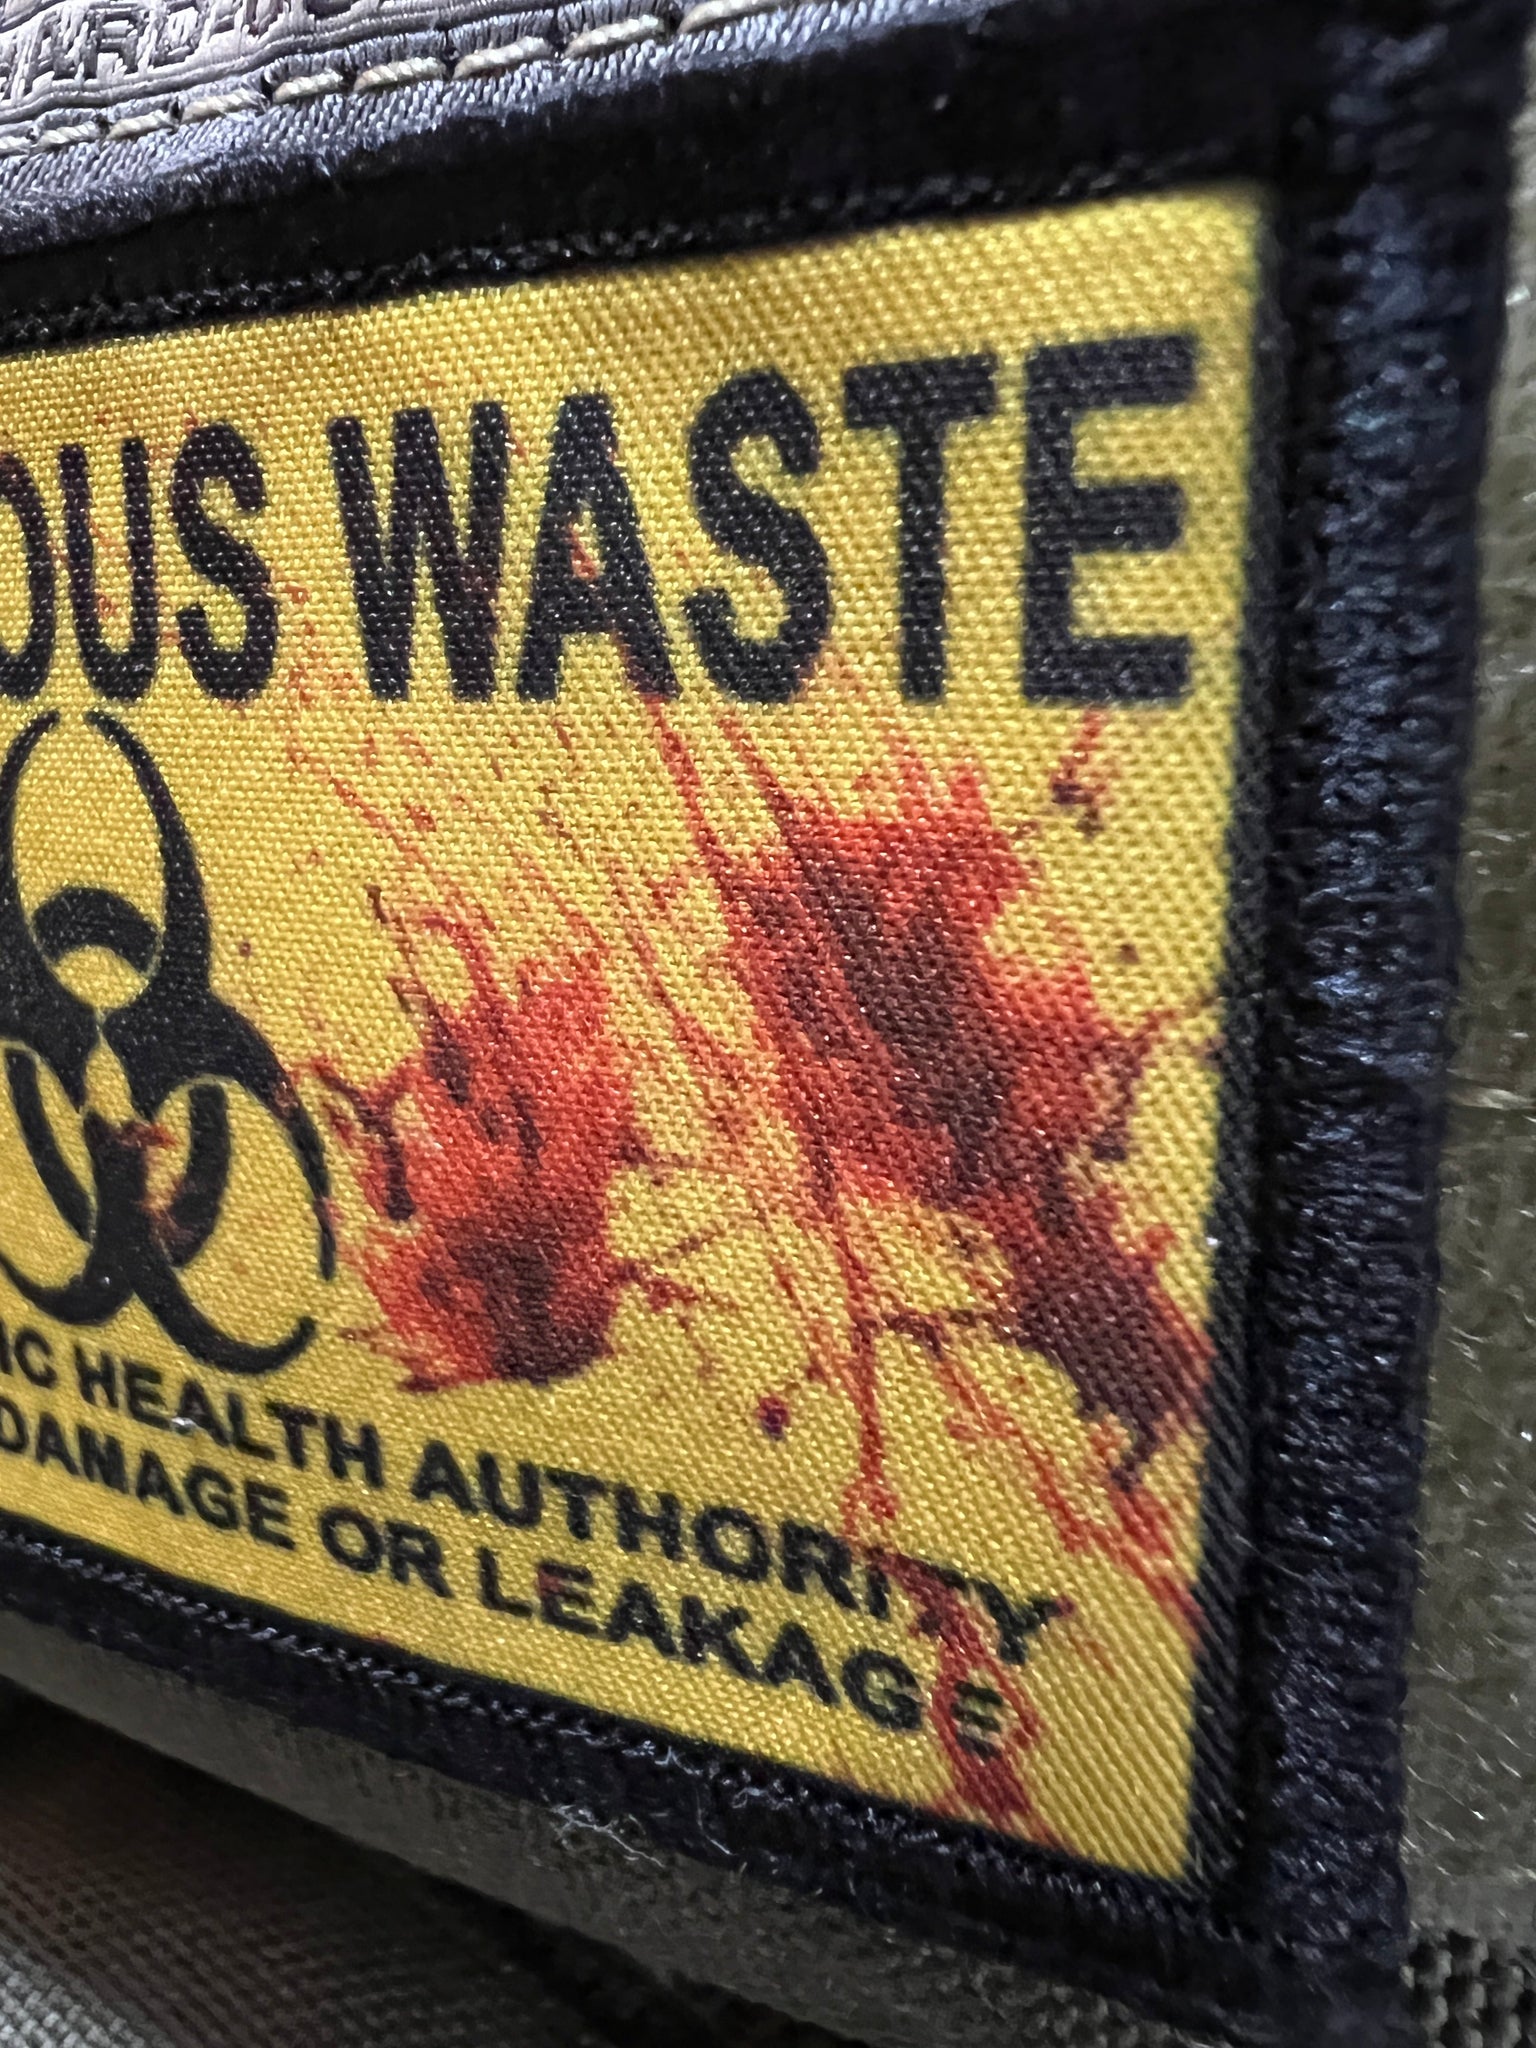 Infectious Waste Warning3